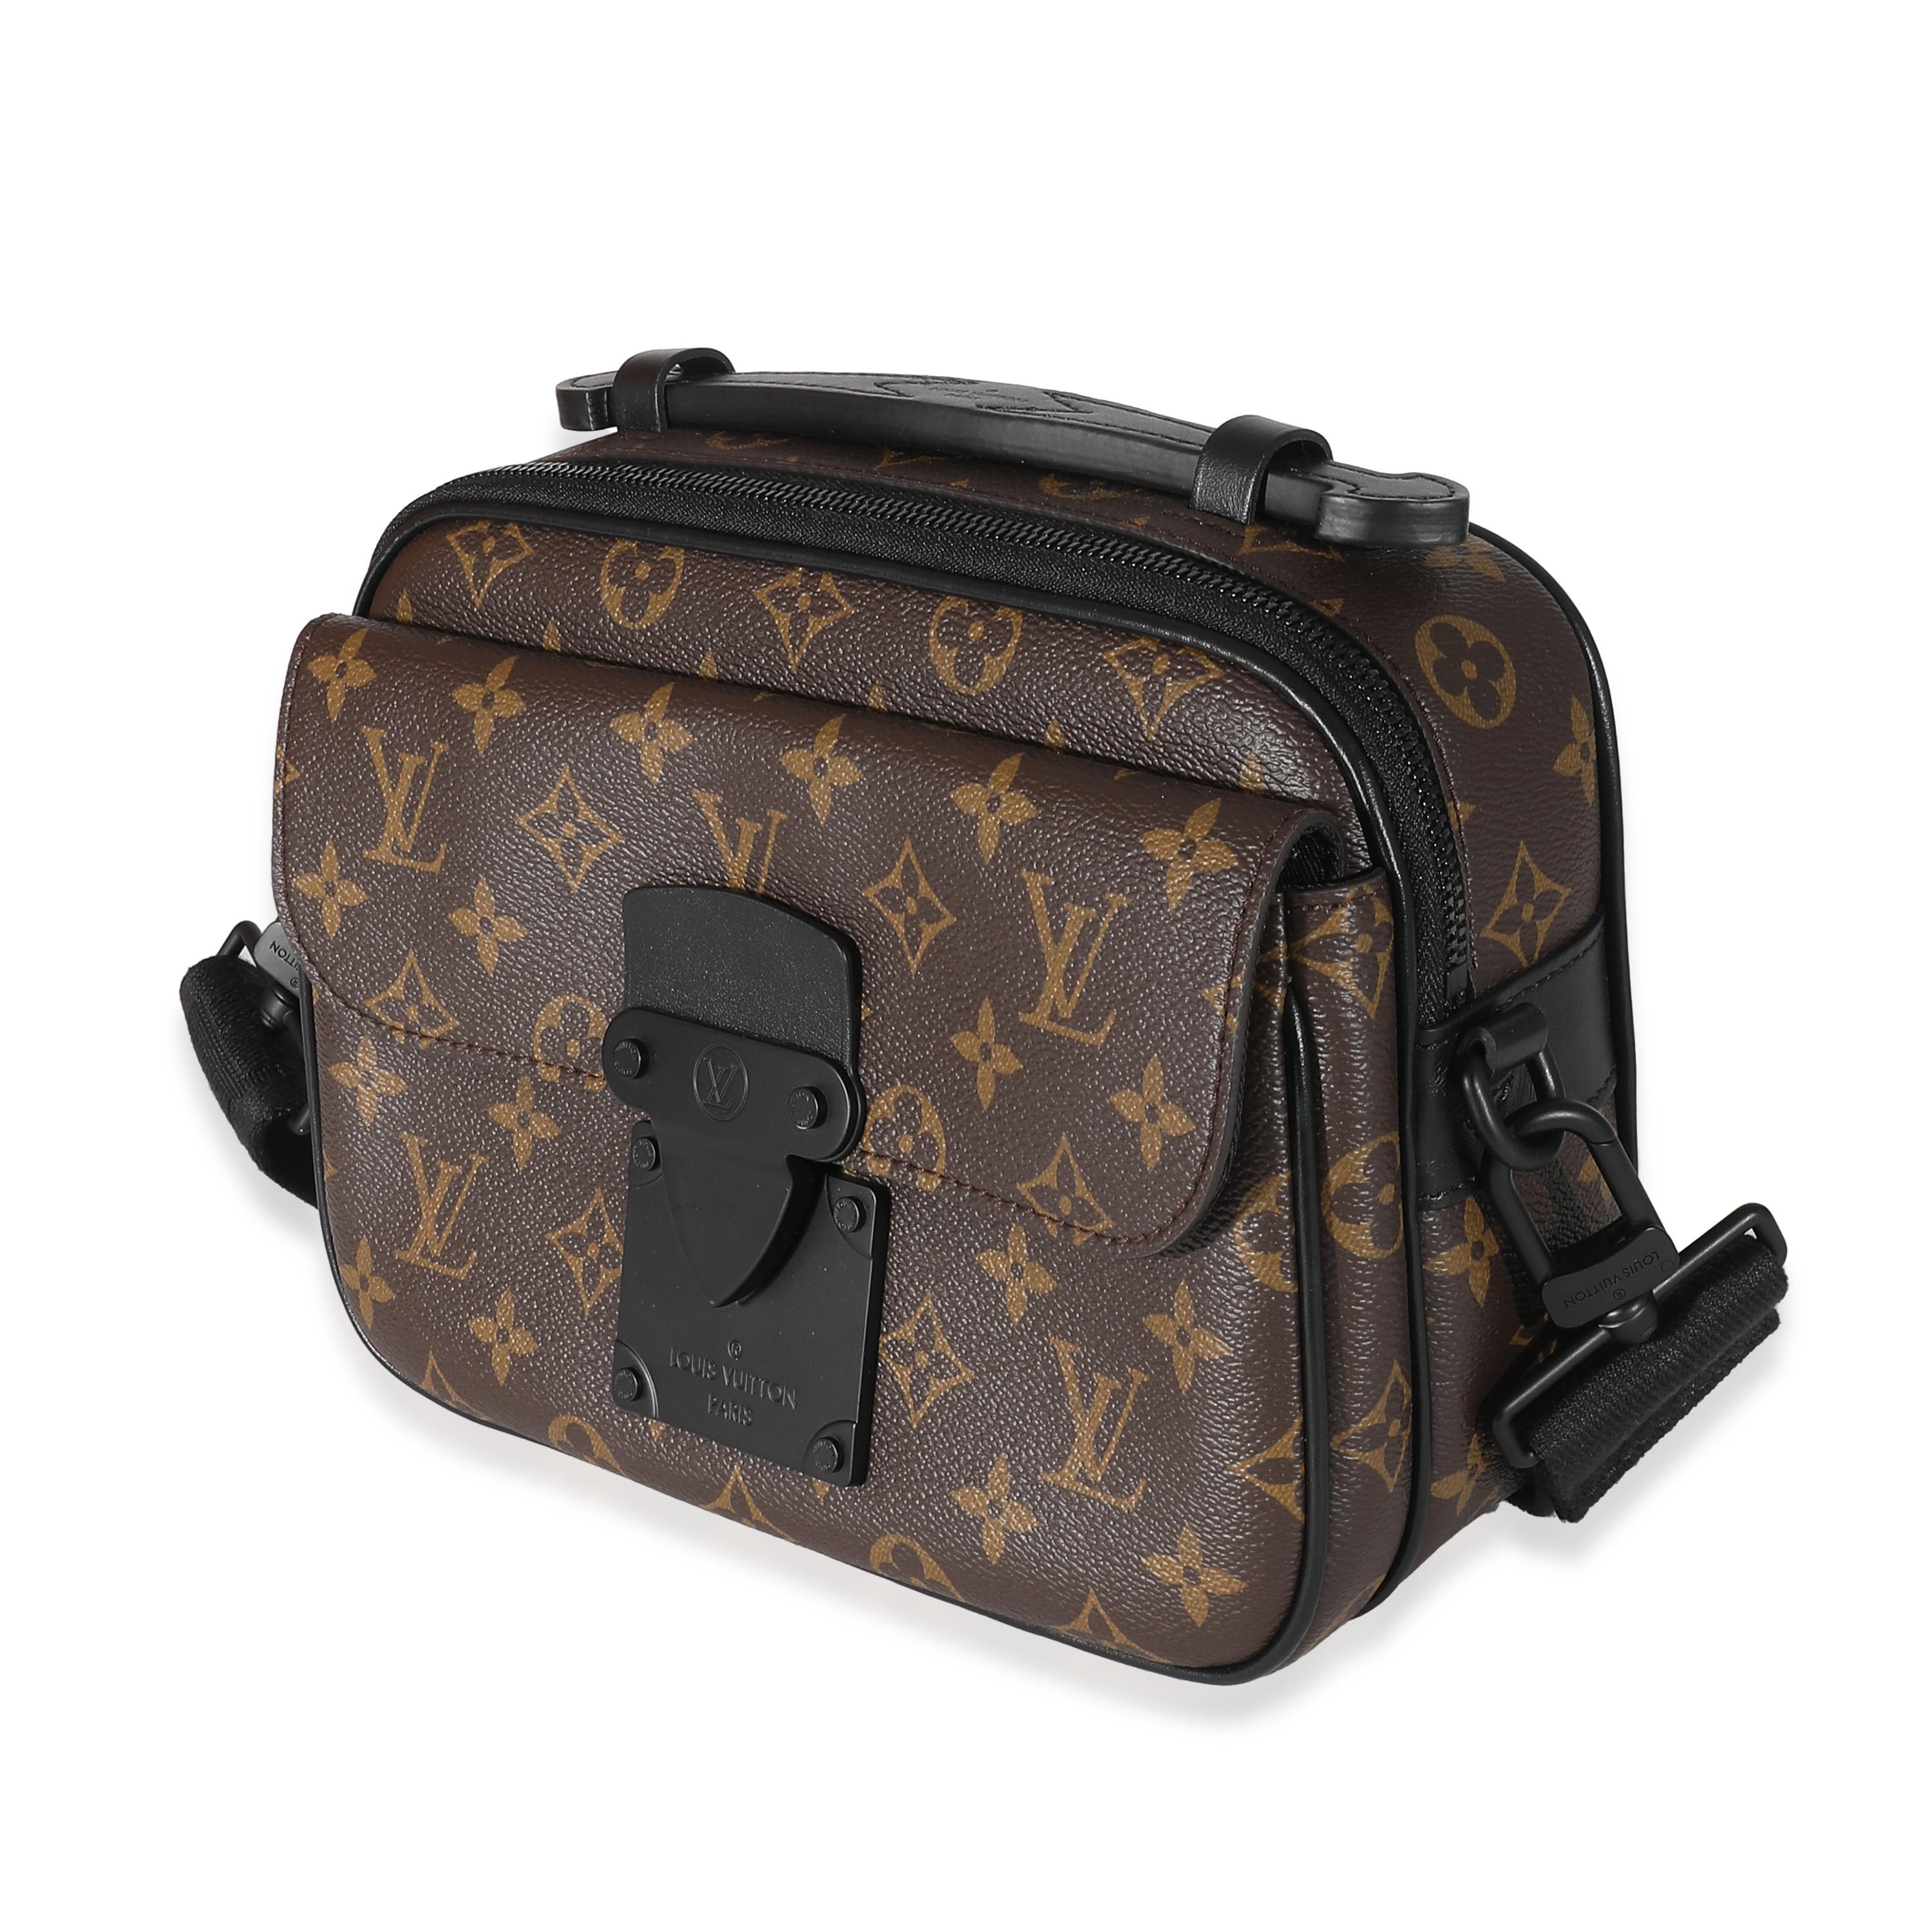 Louis Vuitton Monogram Macassar S Lock Messenger In Excellent Condition For Sale In New York, NY